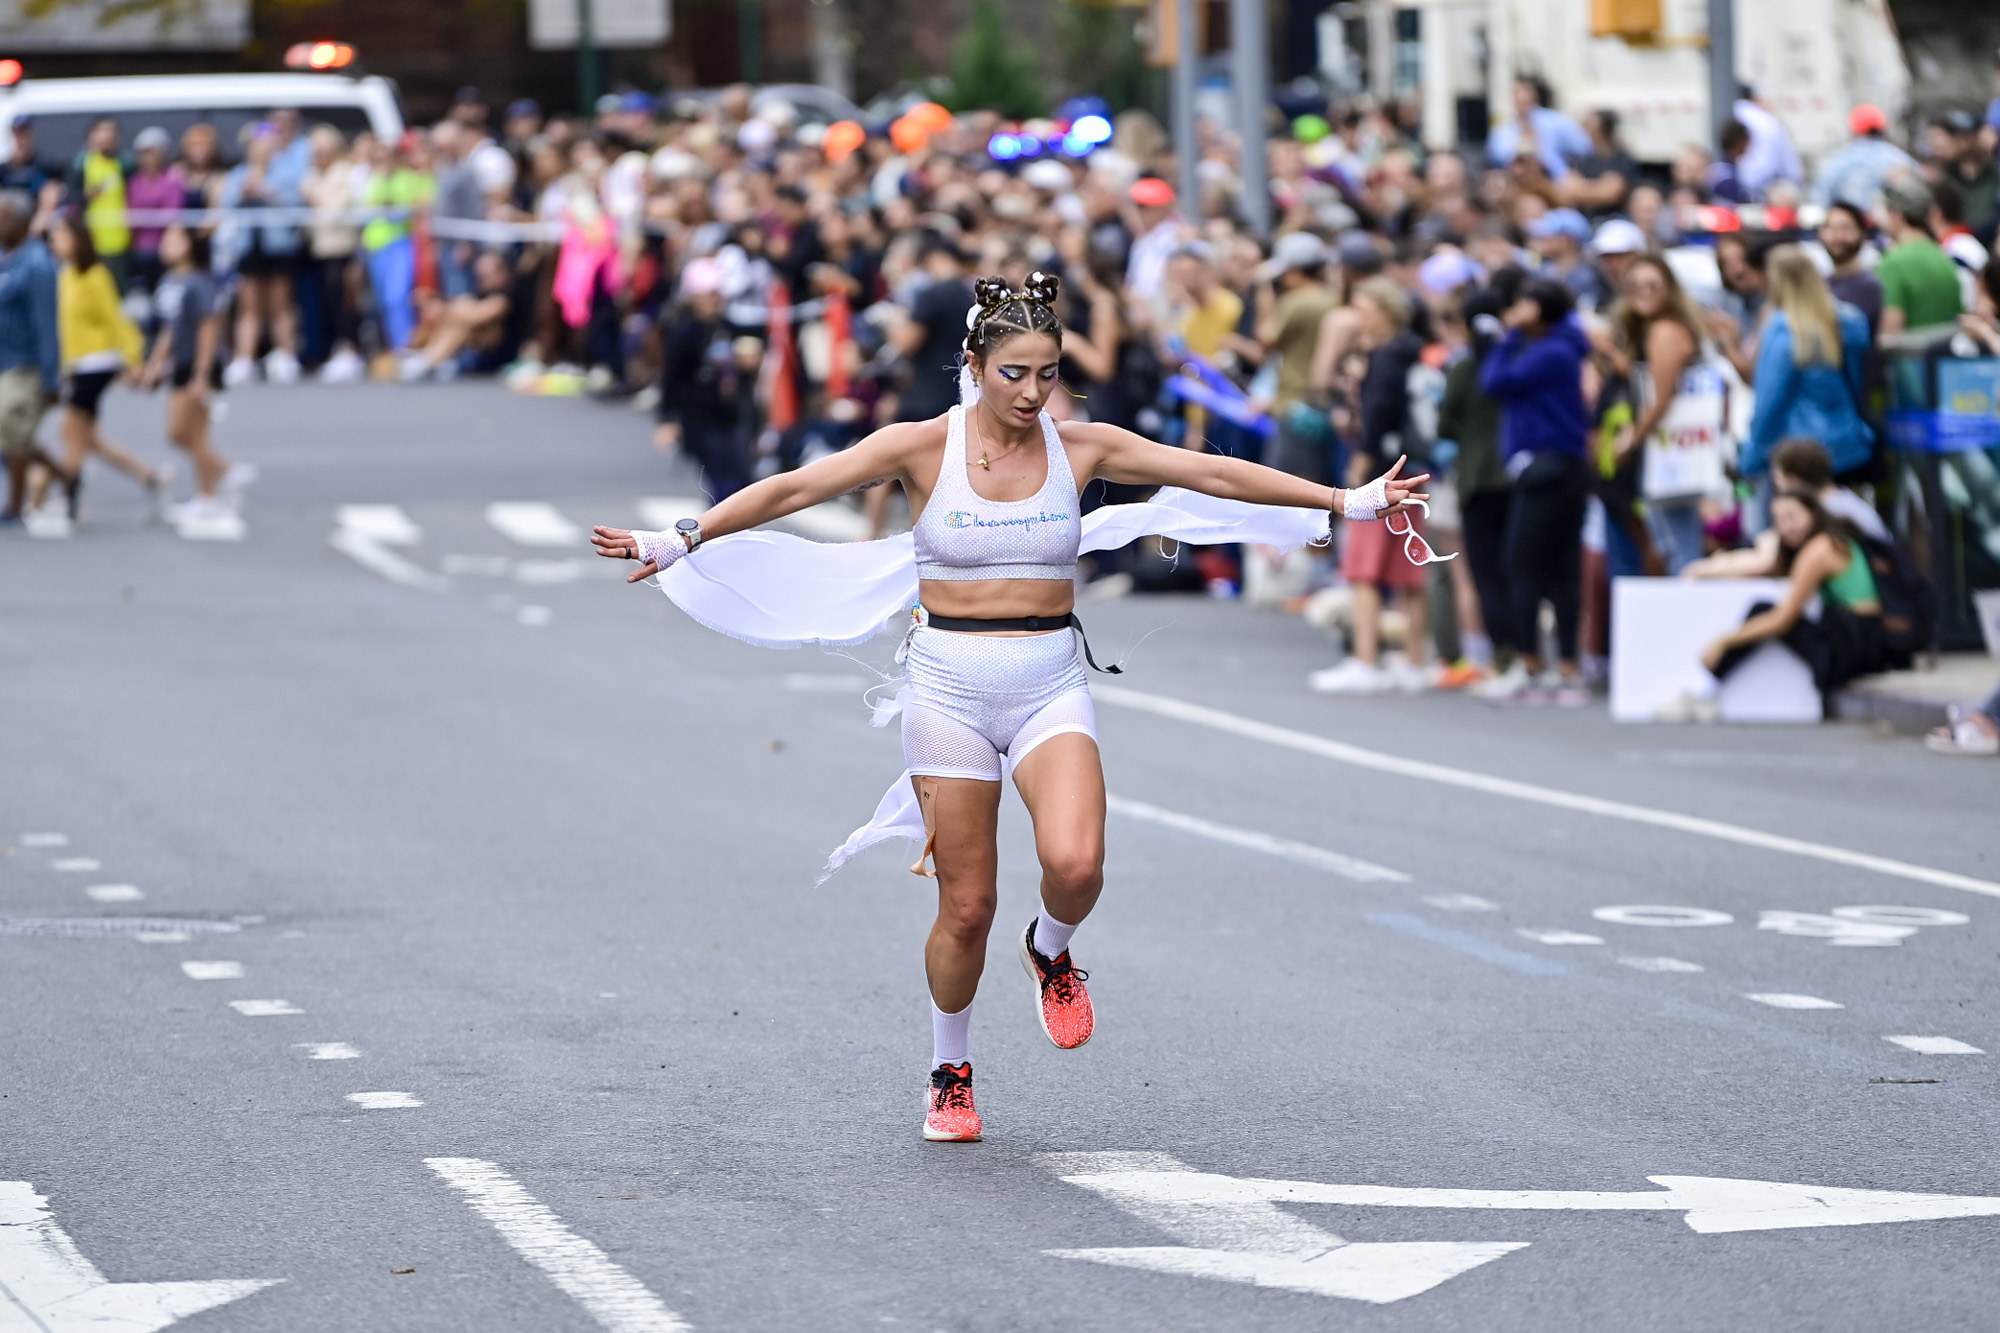 A lone runner holds up their arms to the side